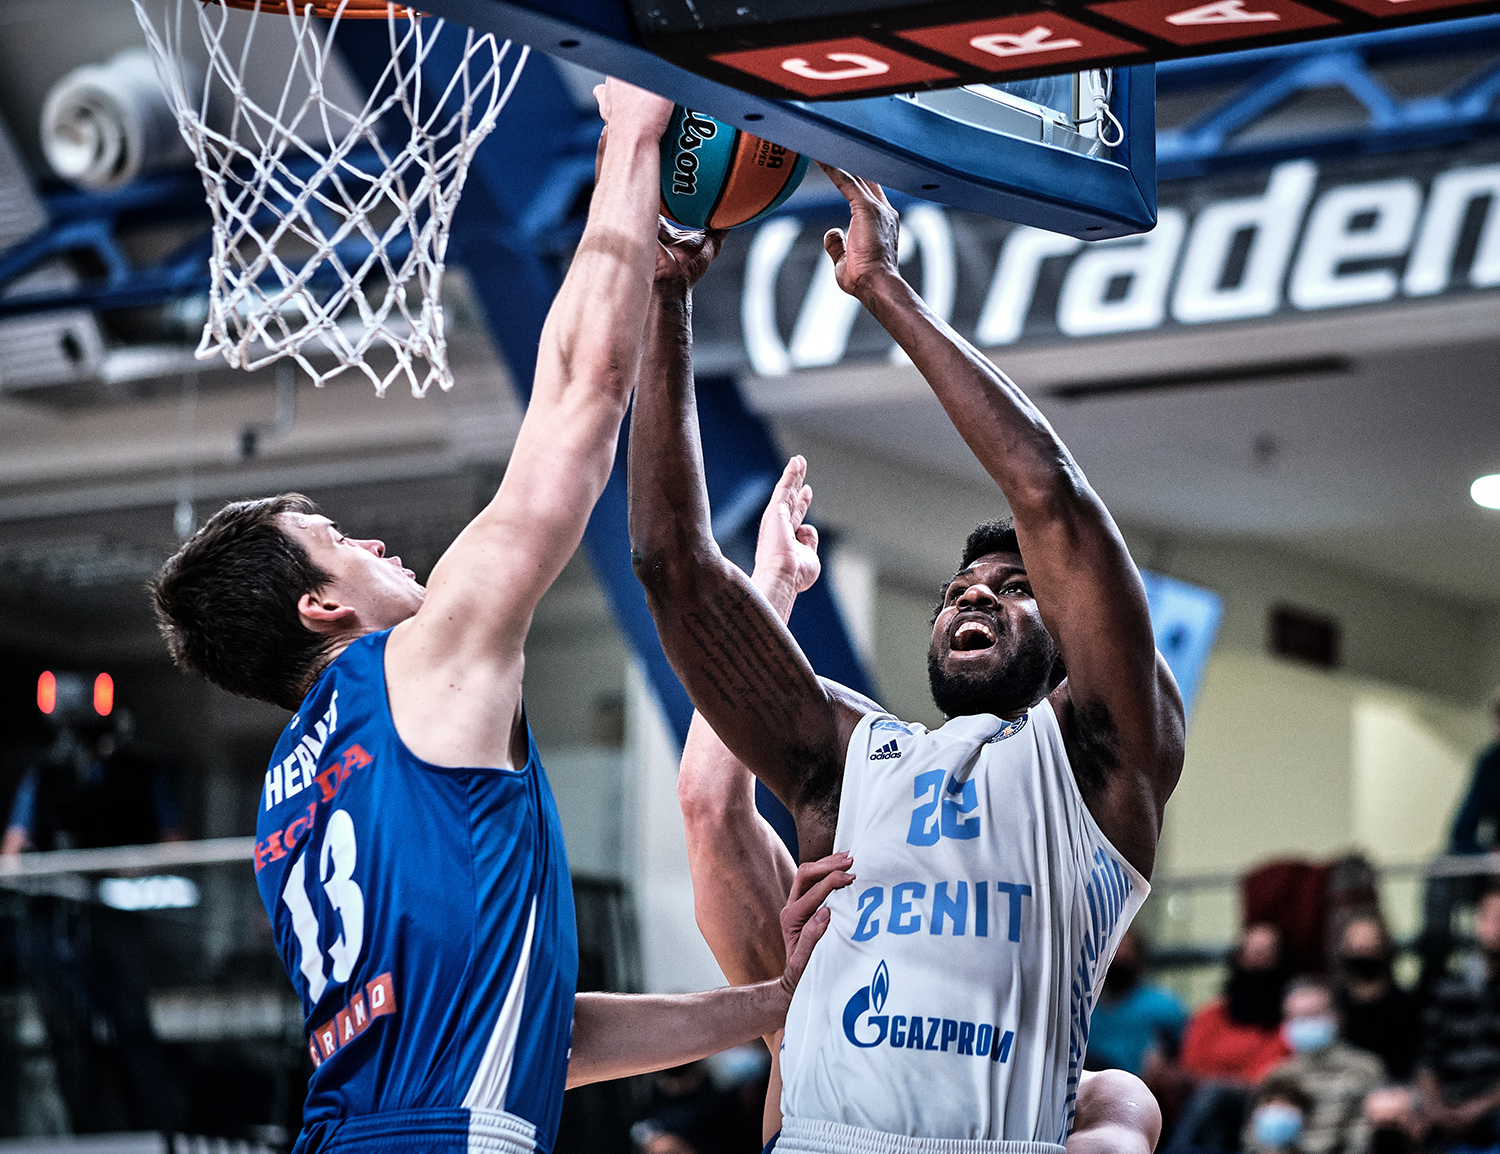 Jordan Loyd and Zenit steal the win from Kalev in the last seconds